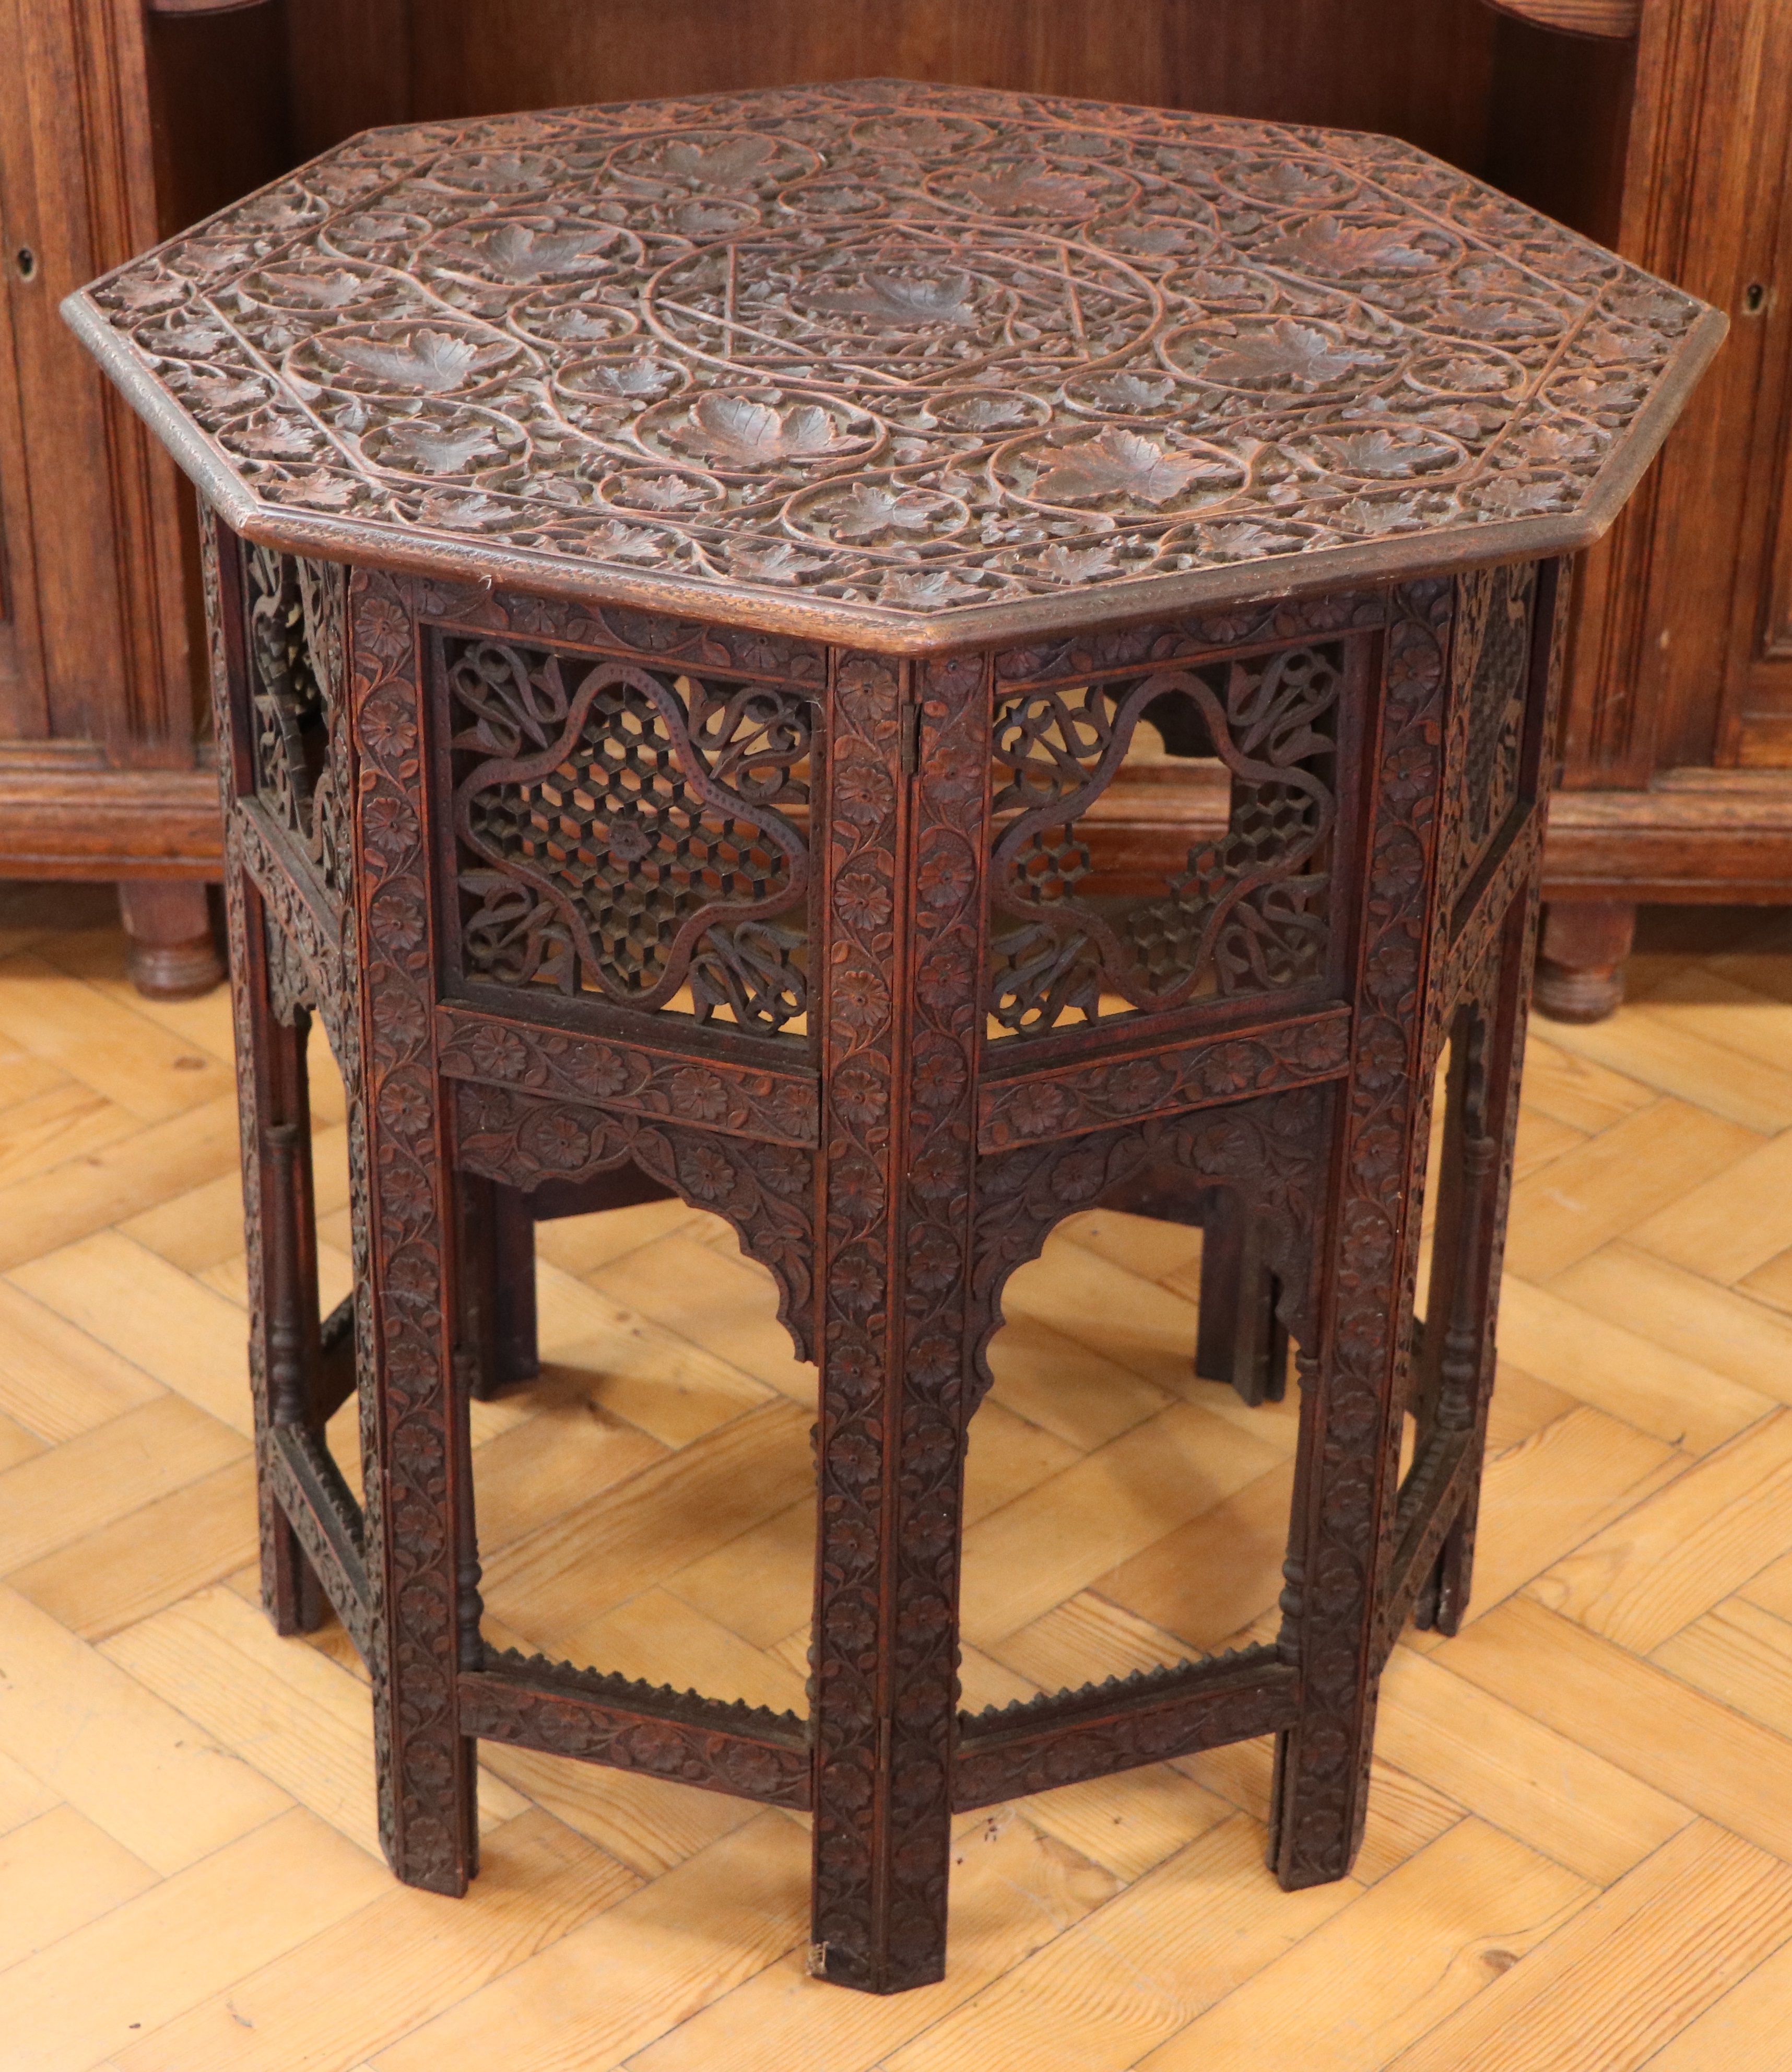 An early 20th Century Indian Hoshiarpur carved wooden folding table, 61 cm x 63 cm high - Image 2 of 7